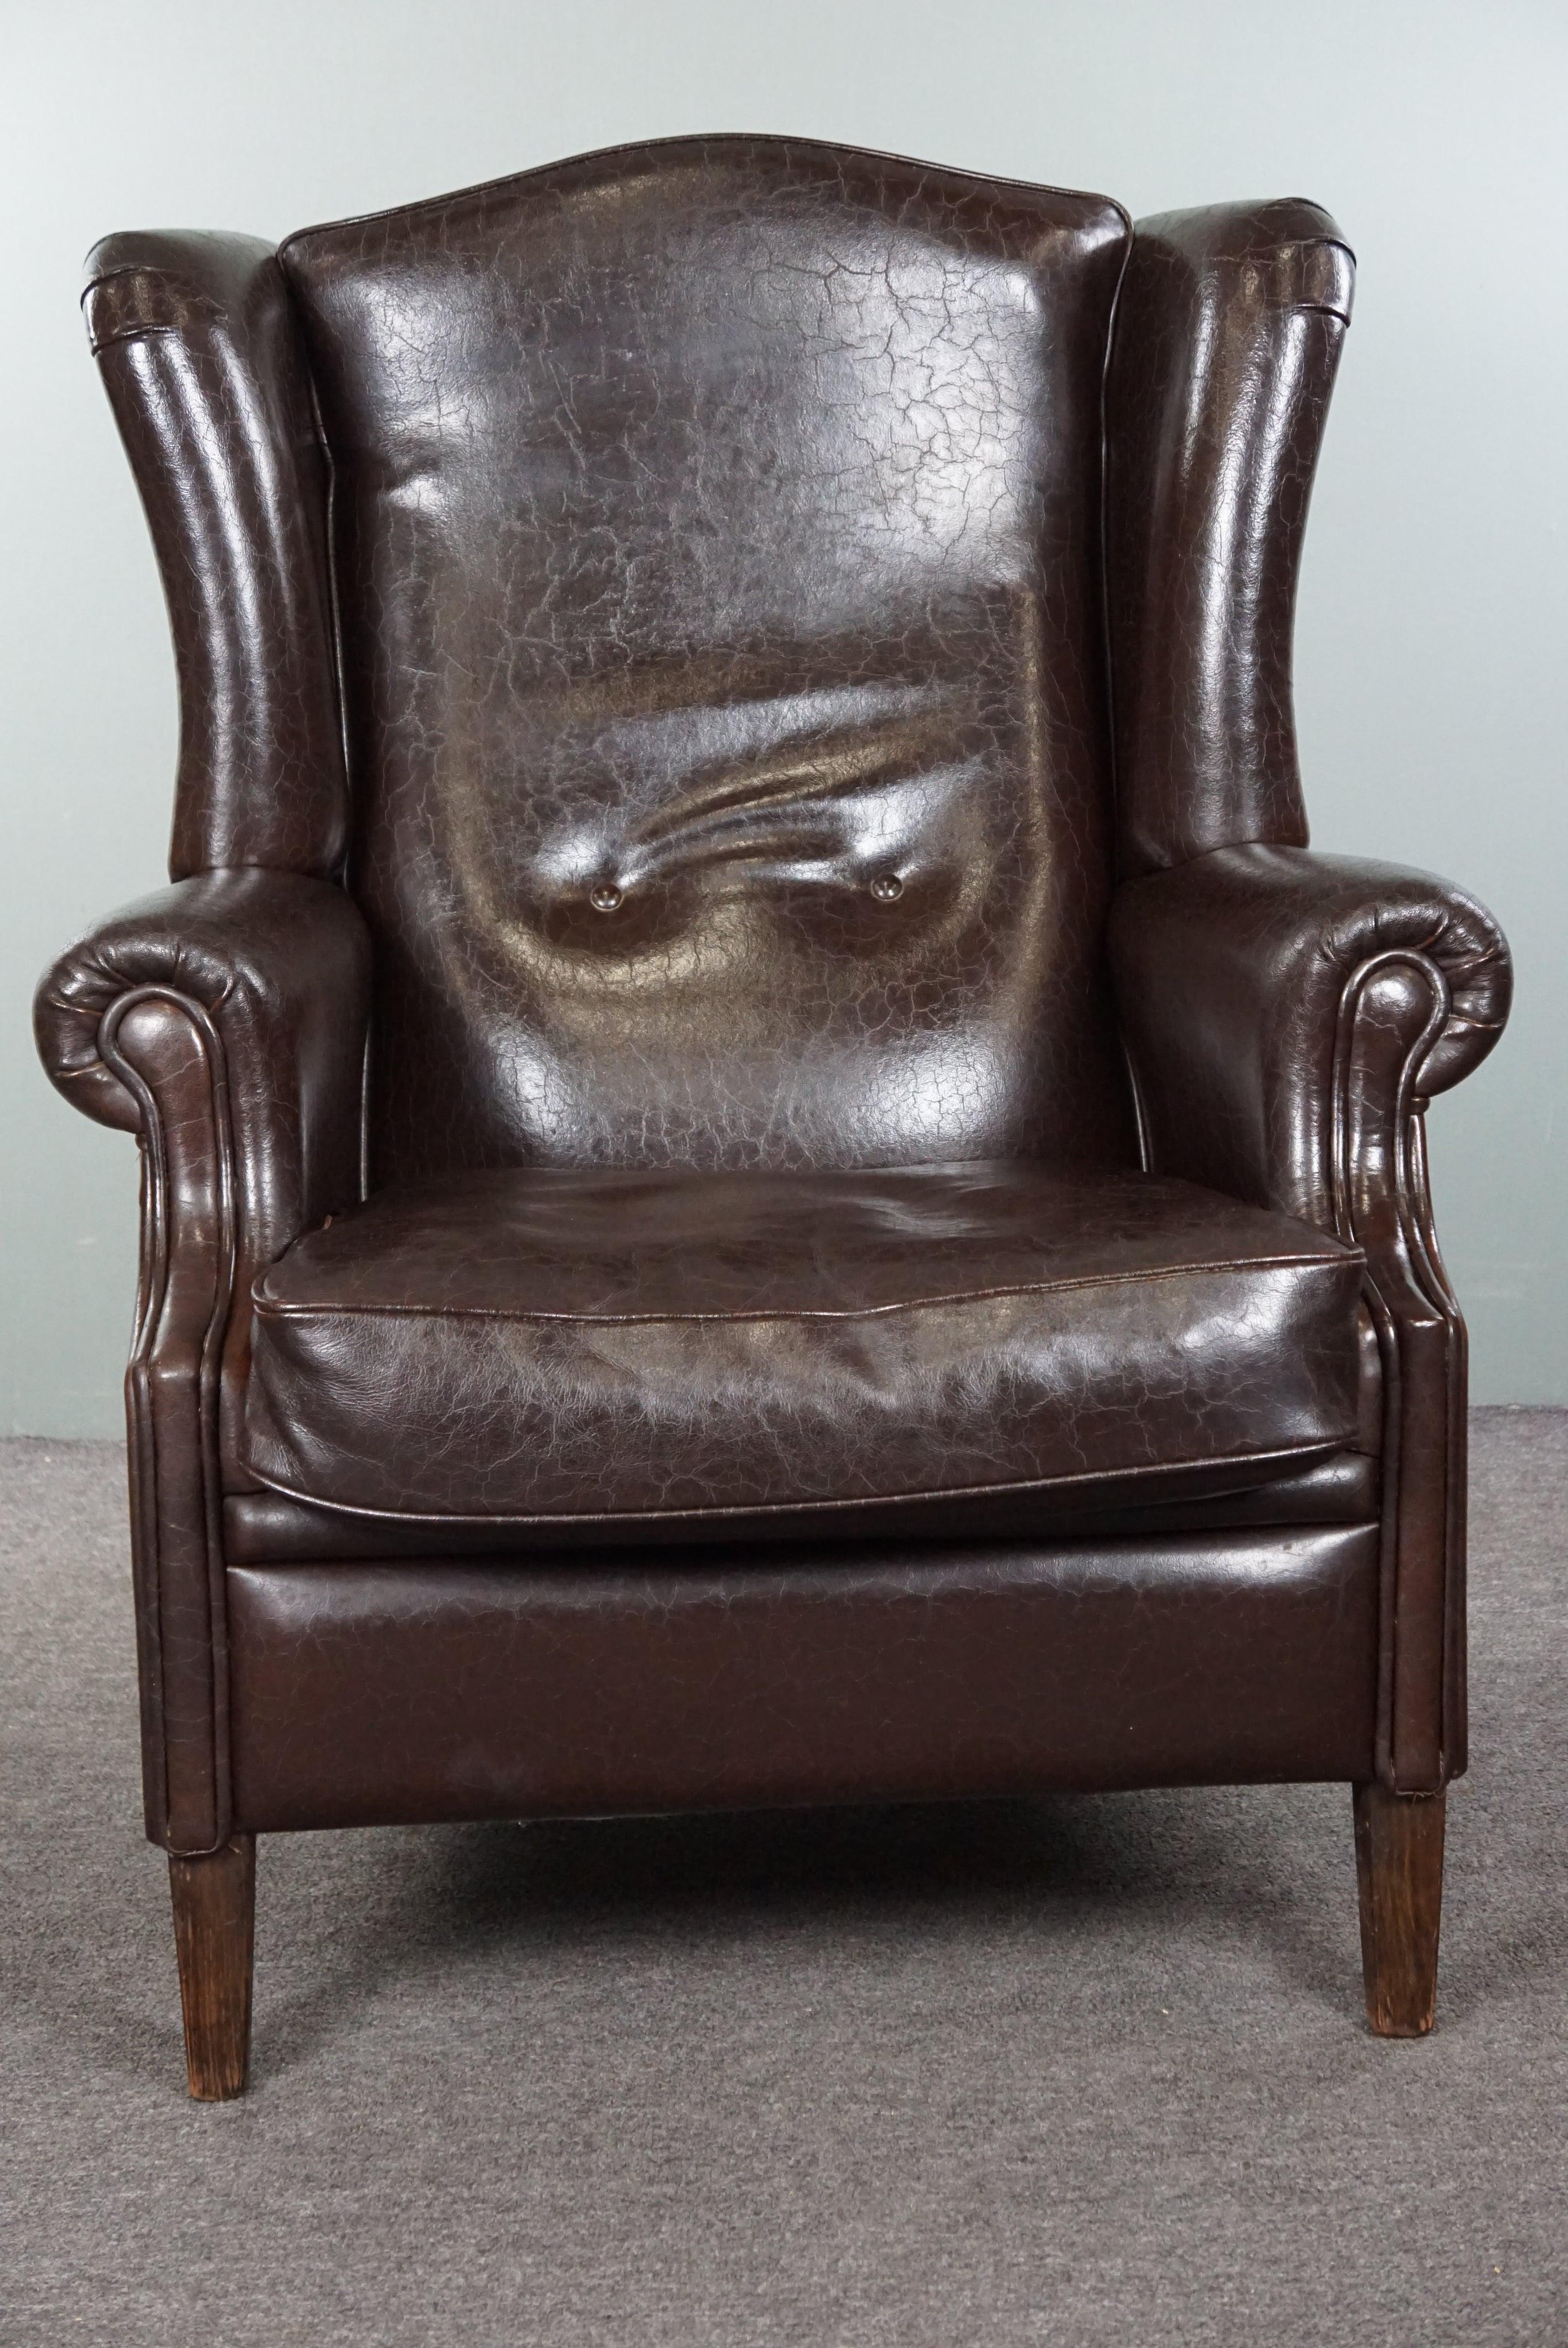 Offered is this well-fitting leather wingback armchair in a beautiful deep dark brown color. Enhance your interior with this excellently preserved and impressive dark brown leather wingback armchair. This armchair not only embodies timeless class